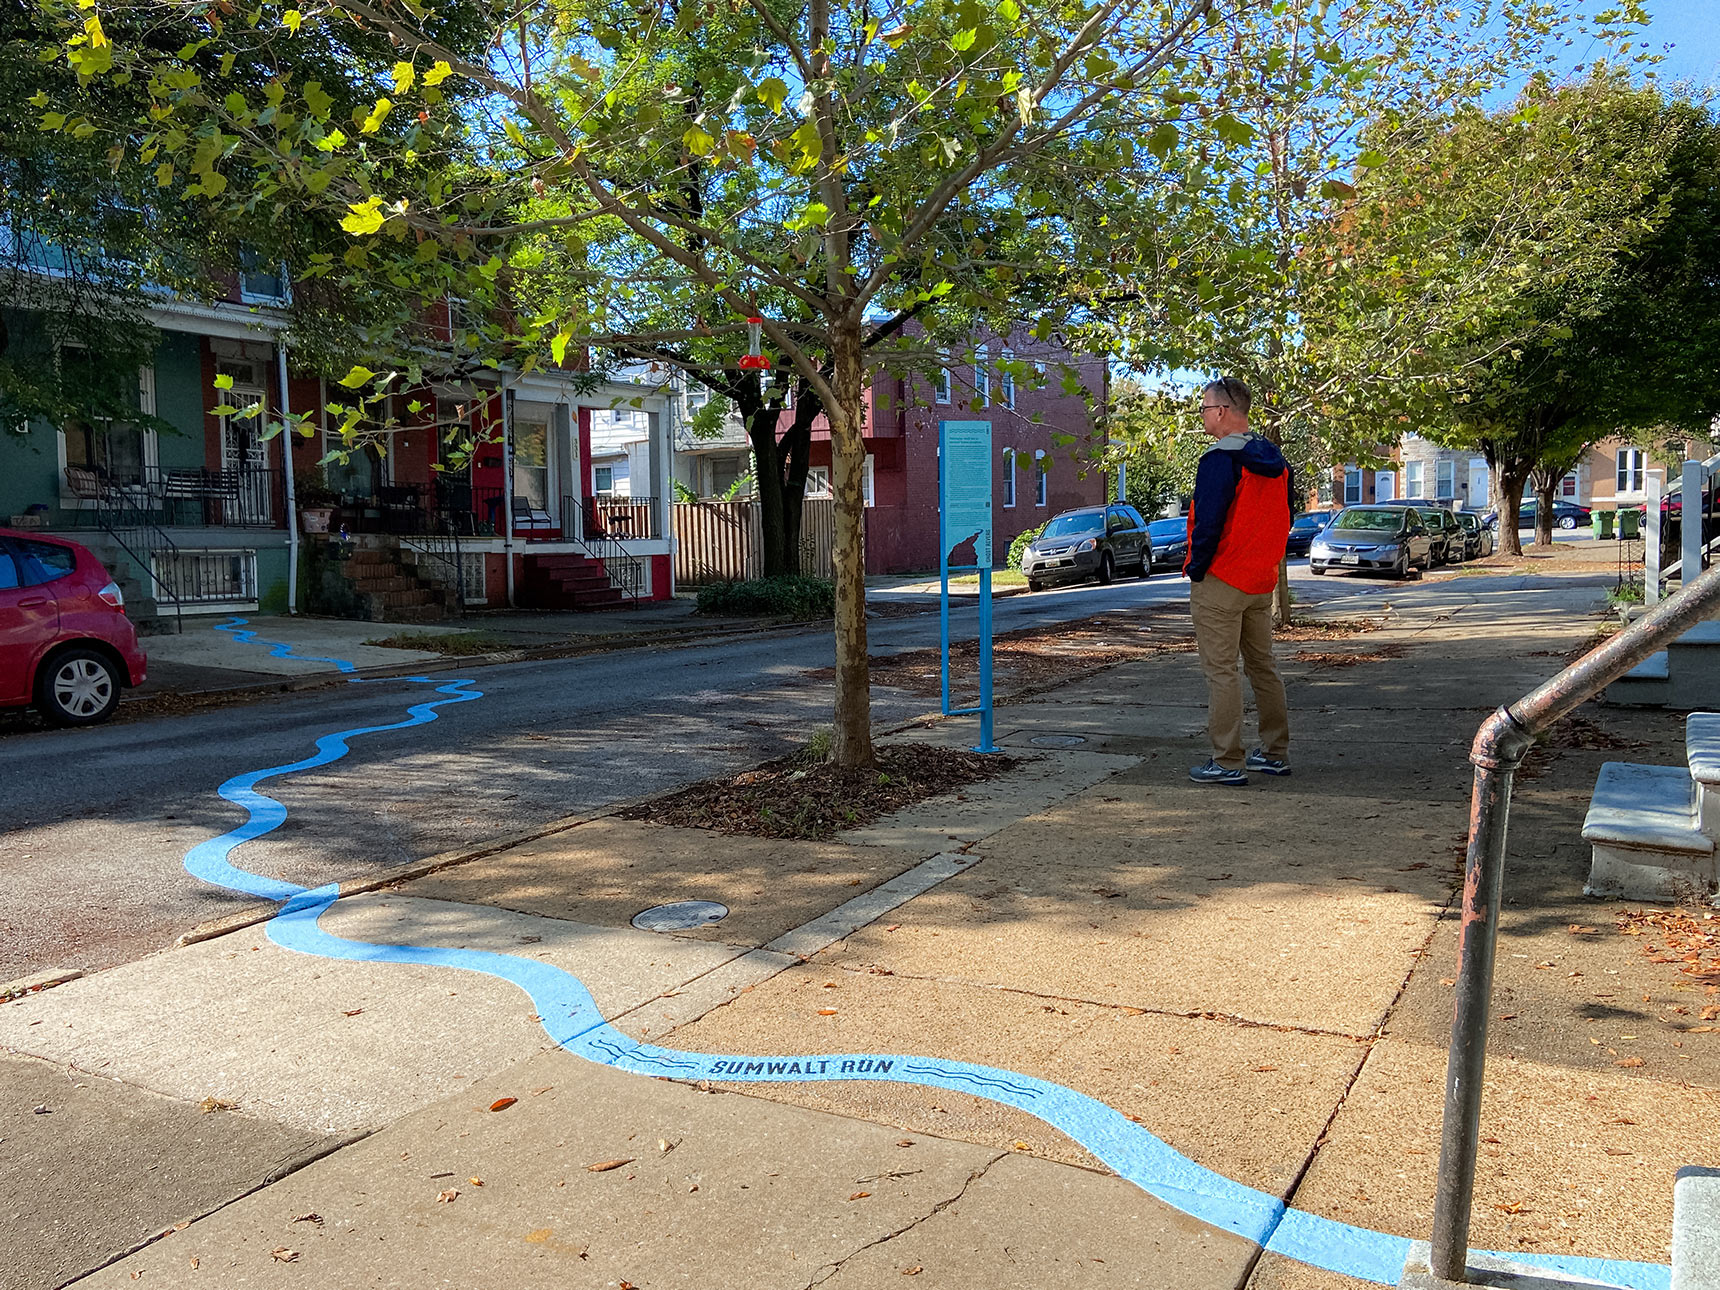 A man stands on a sidewalk in a residential neighborhood, reading a blue interpretive sign for a public art installation mapping a buried stream in Baltimore. Photo shows a wide sidewalk and street, with a six-inch wide bright blue wavy line snaking across. The words Sumwalt Run are imprinted onto the line.